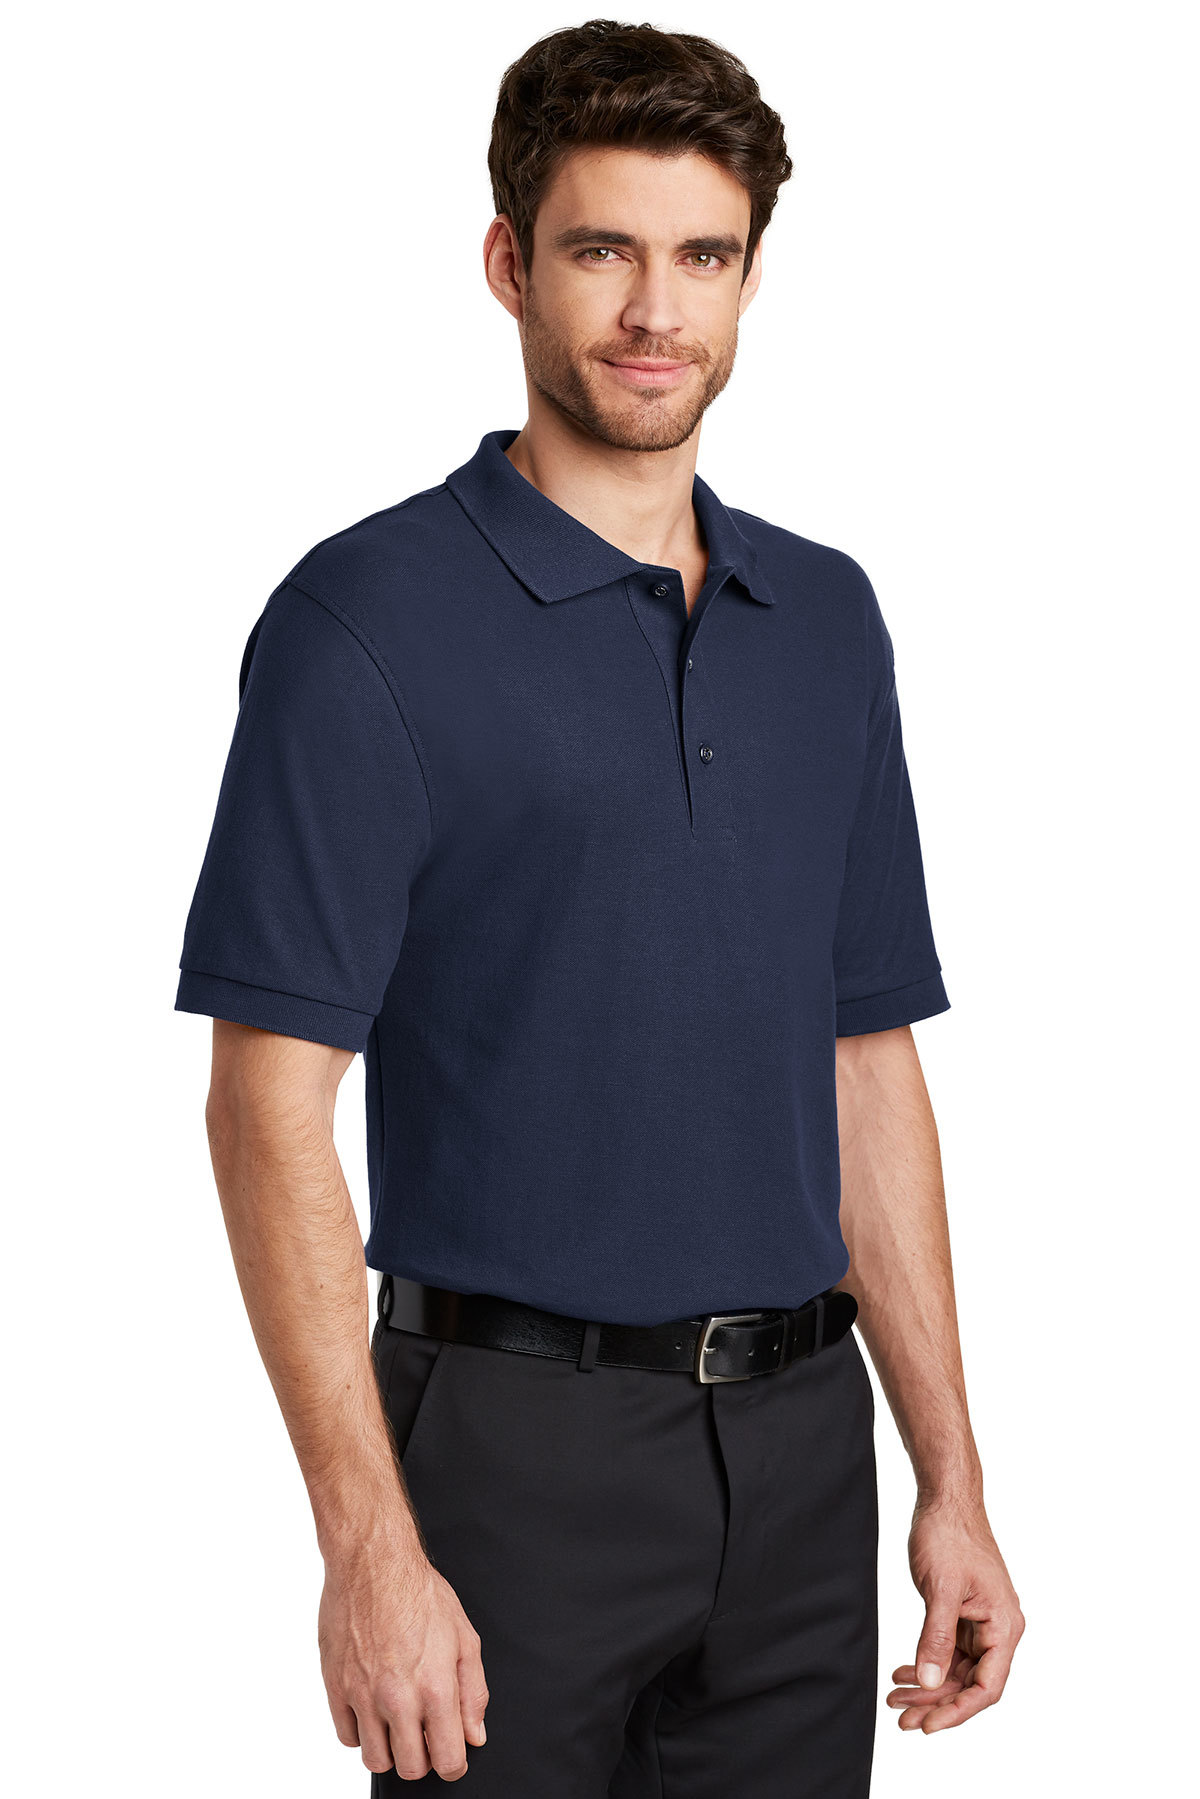 Port Authority Tall Silk Touch™ Polo | Product | Company Casuals